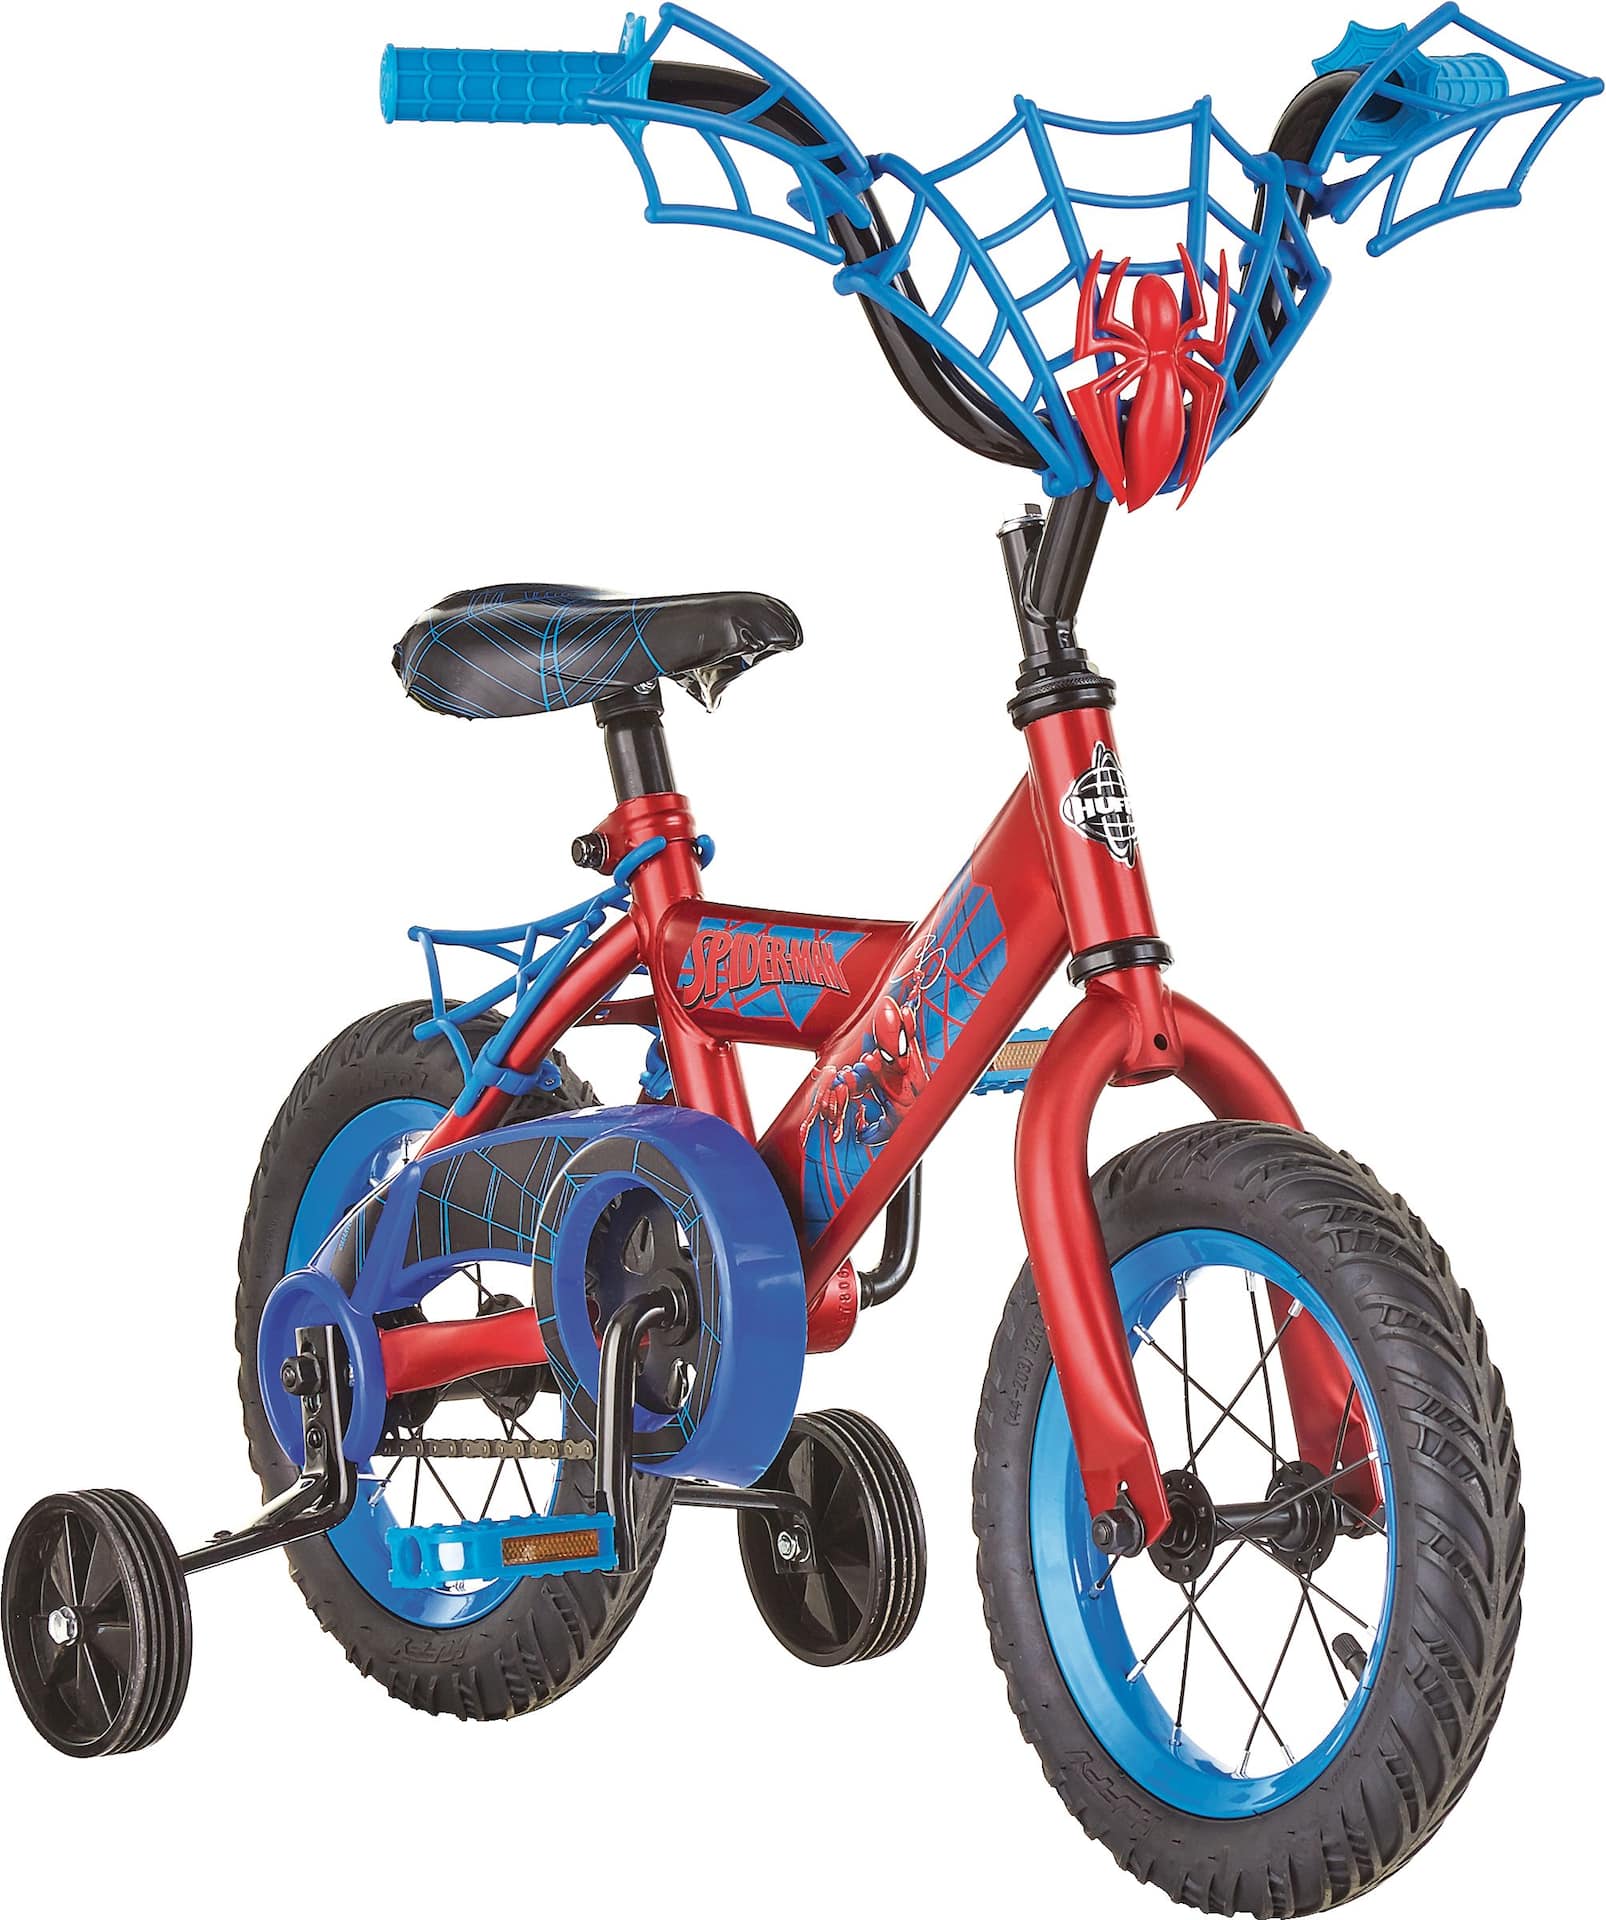 https://media-www.canadiantire.ca/product/playing/cycling/bicycles/0711116/marvel-spiderman-12-kids-bike-ce617415-74ea-42ea-8092-36af4fa1268a-jpgrendition.jpg